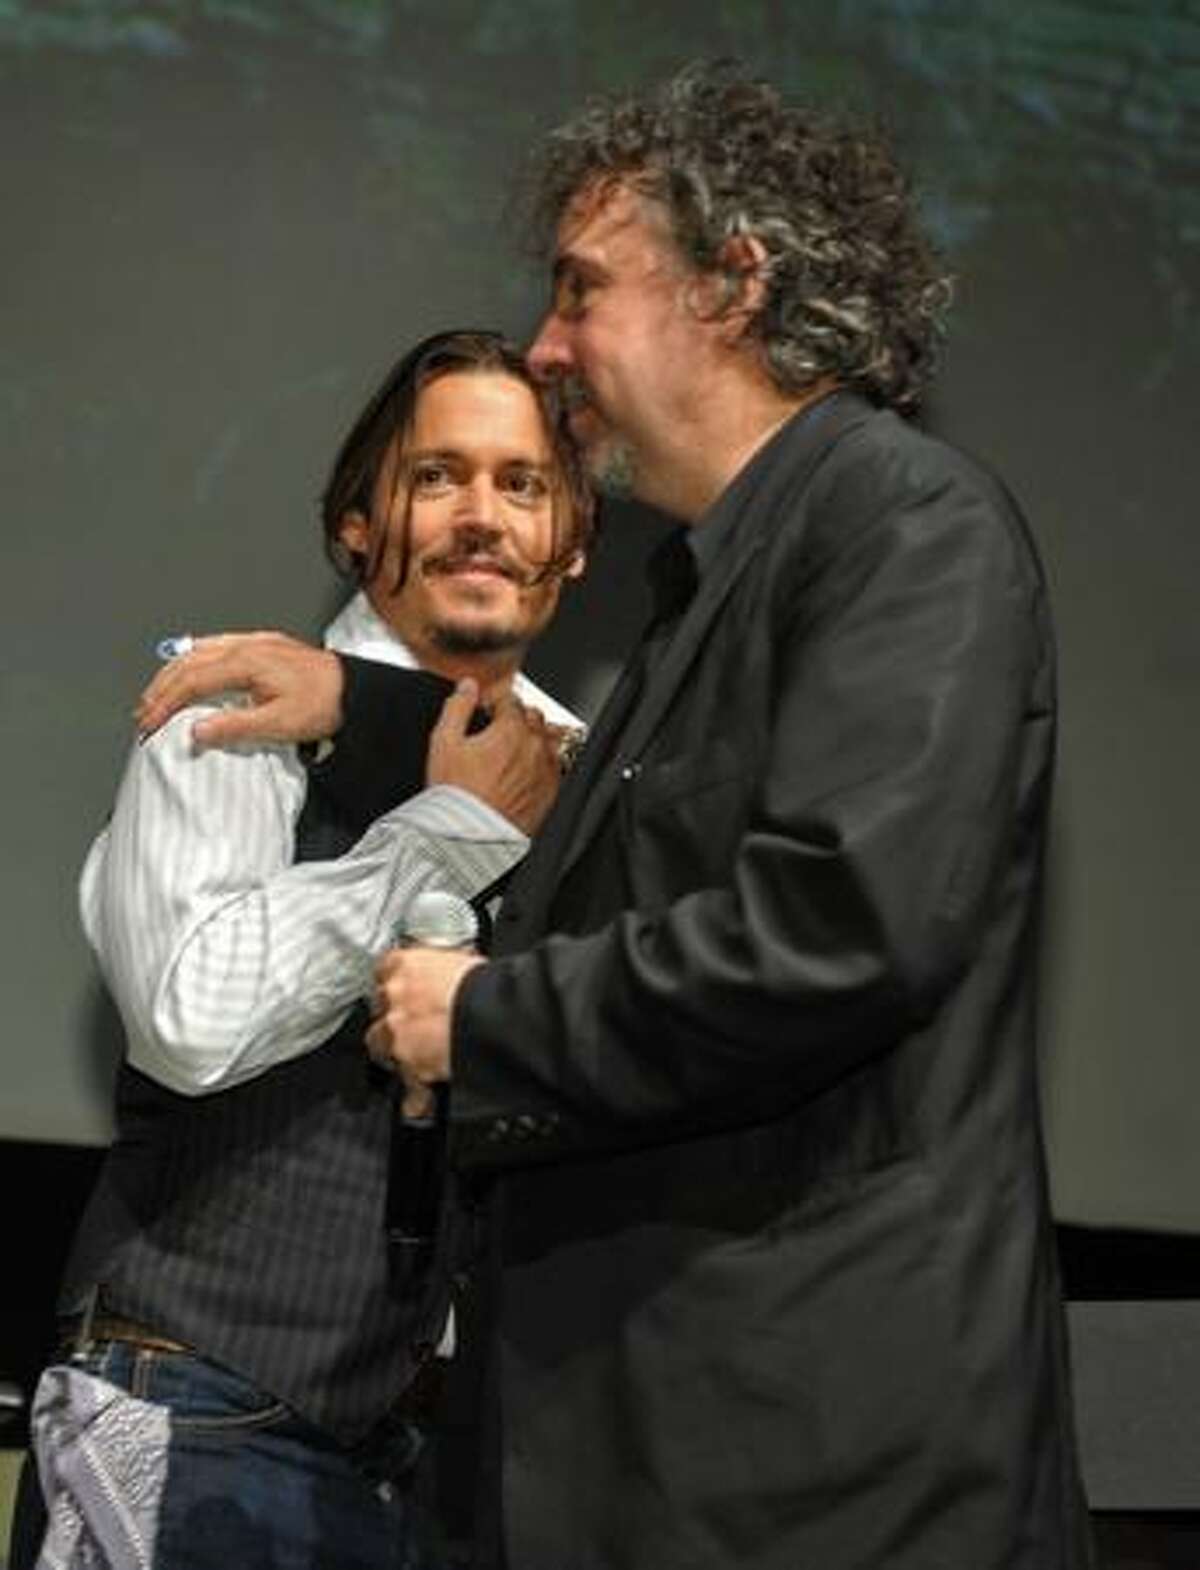 (L-R) Actor Johnny Depp and director Tim Burton speak at "Alice in Wonderland" press conference during Comic-Con 2009 held at San Diego Convention Center in San Diego, California.